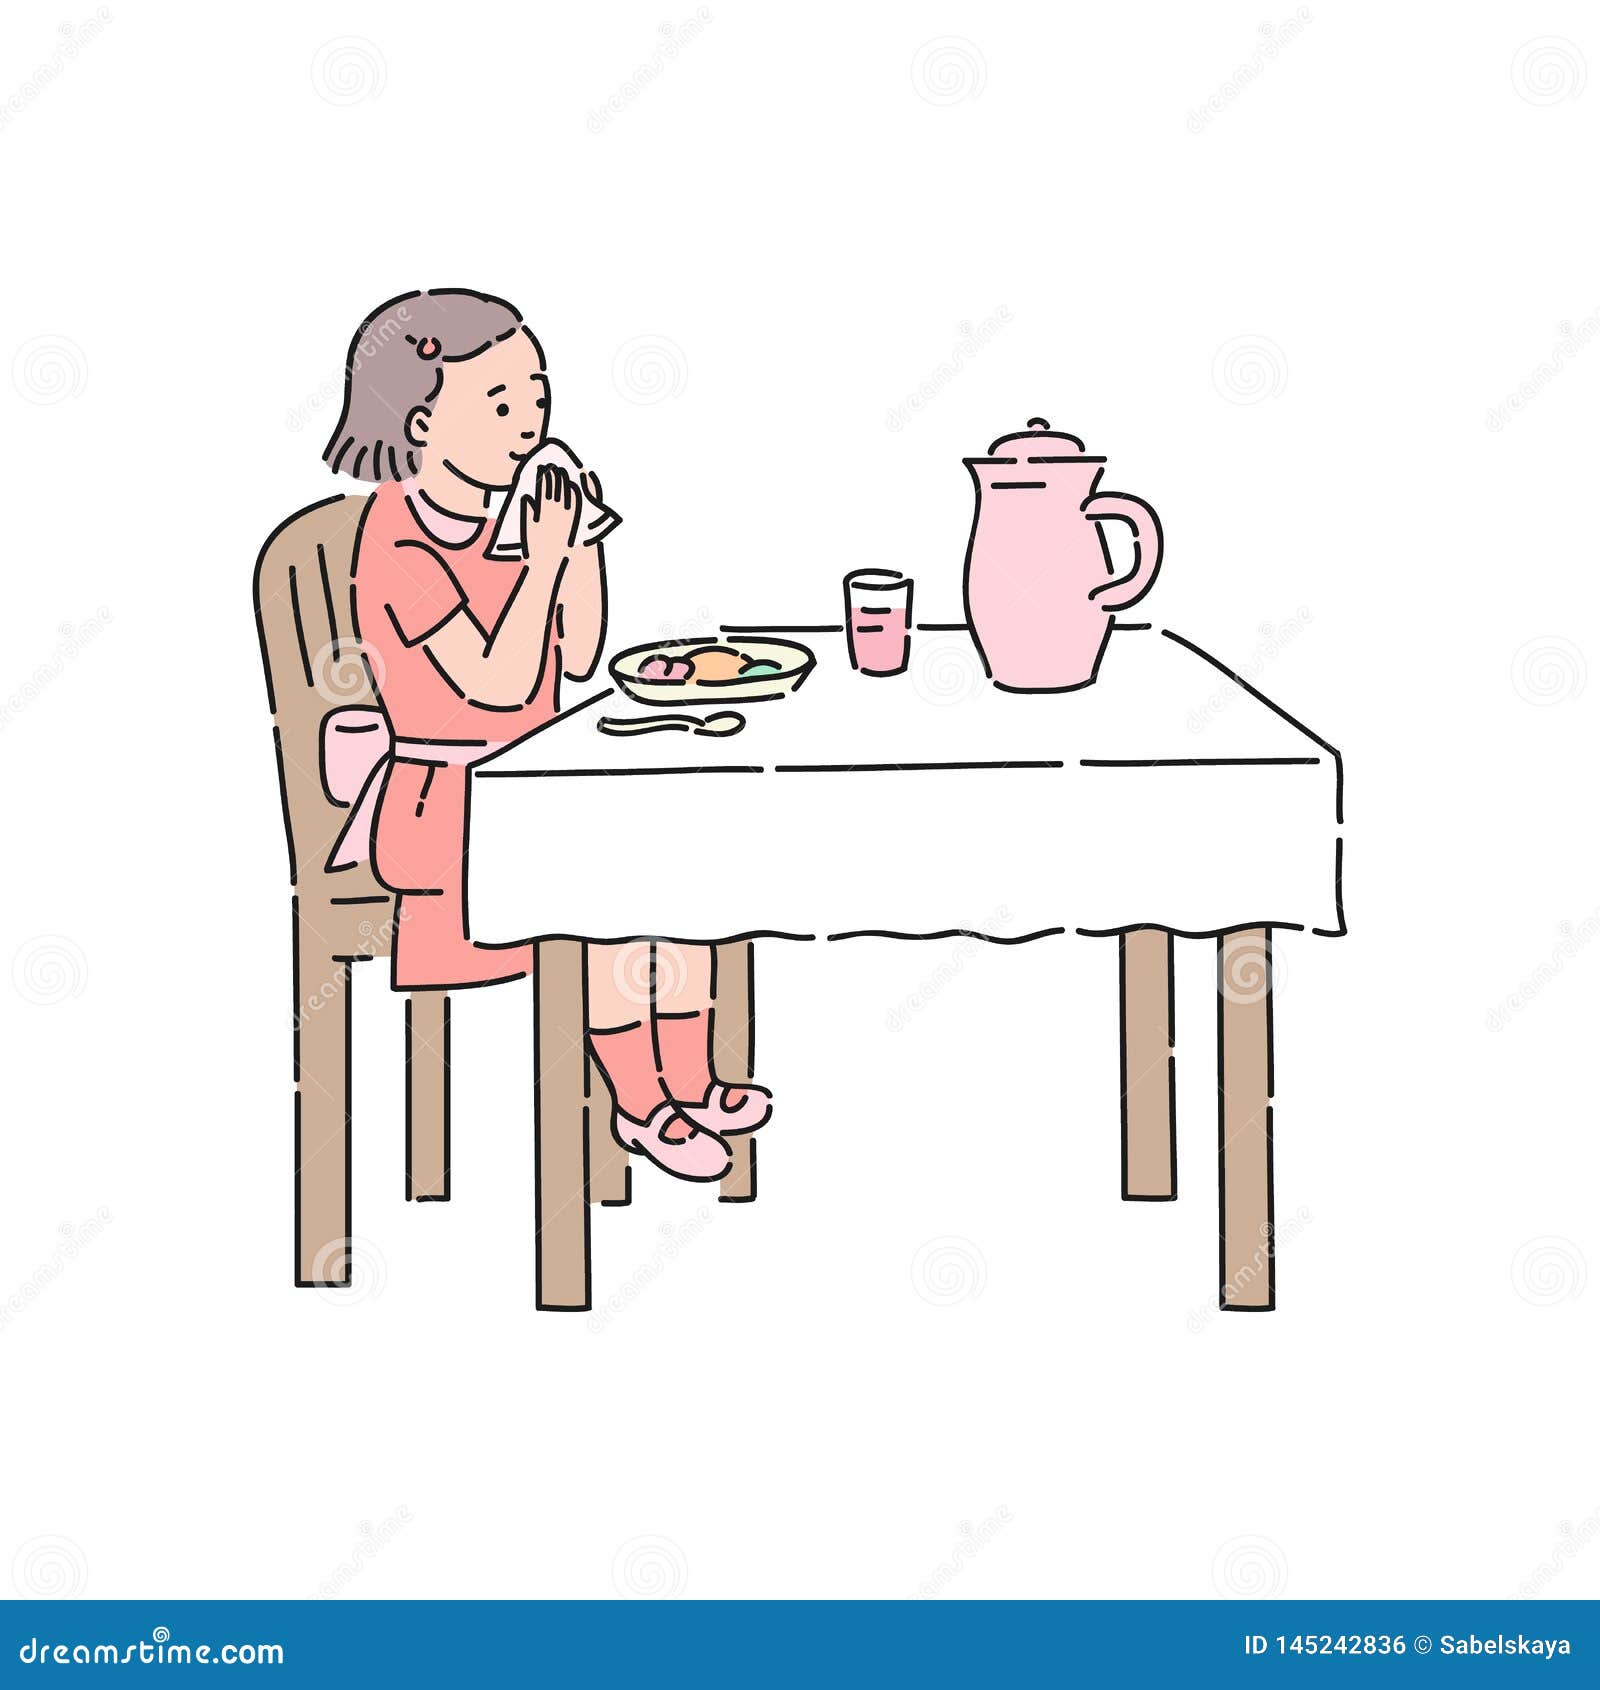 Good Habits Cartoon Stock Photos and Pictures - 1,760 Images | Shutterstock